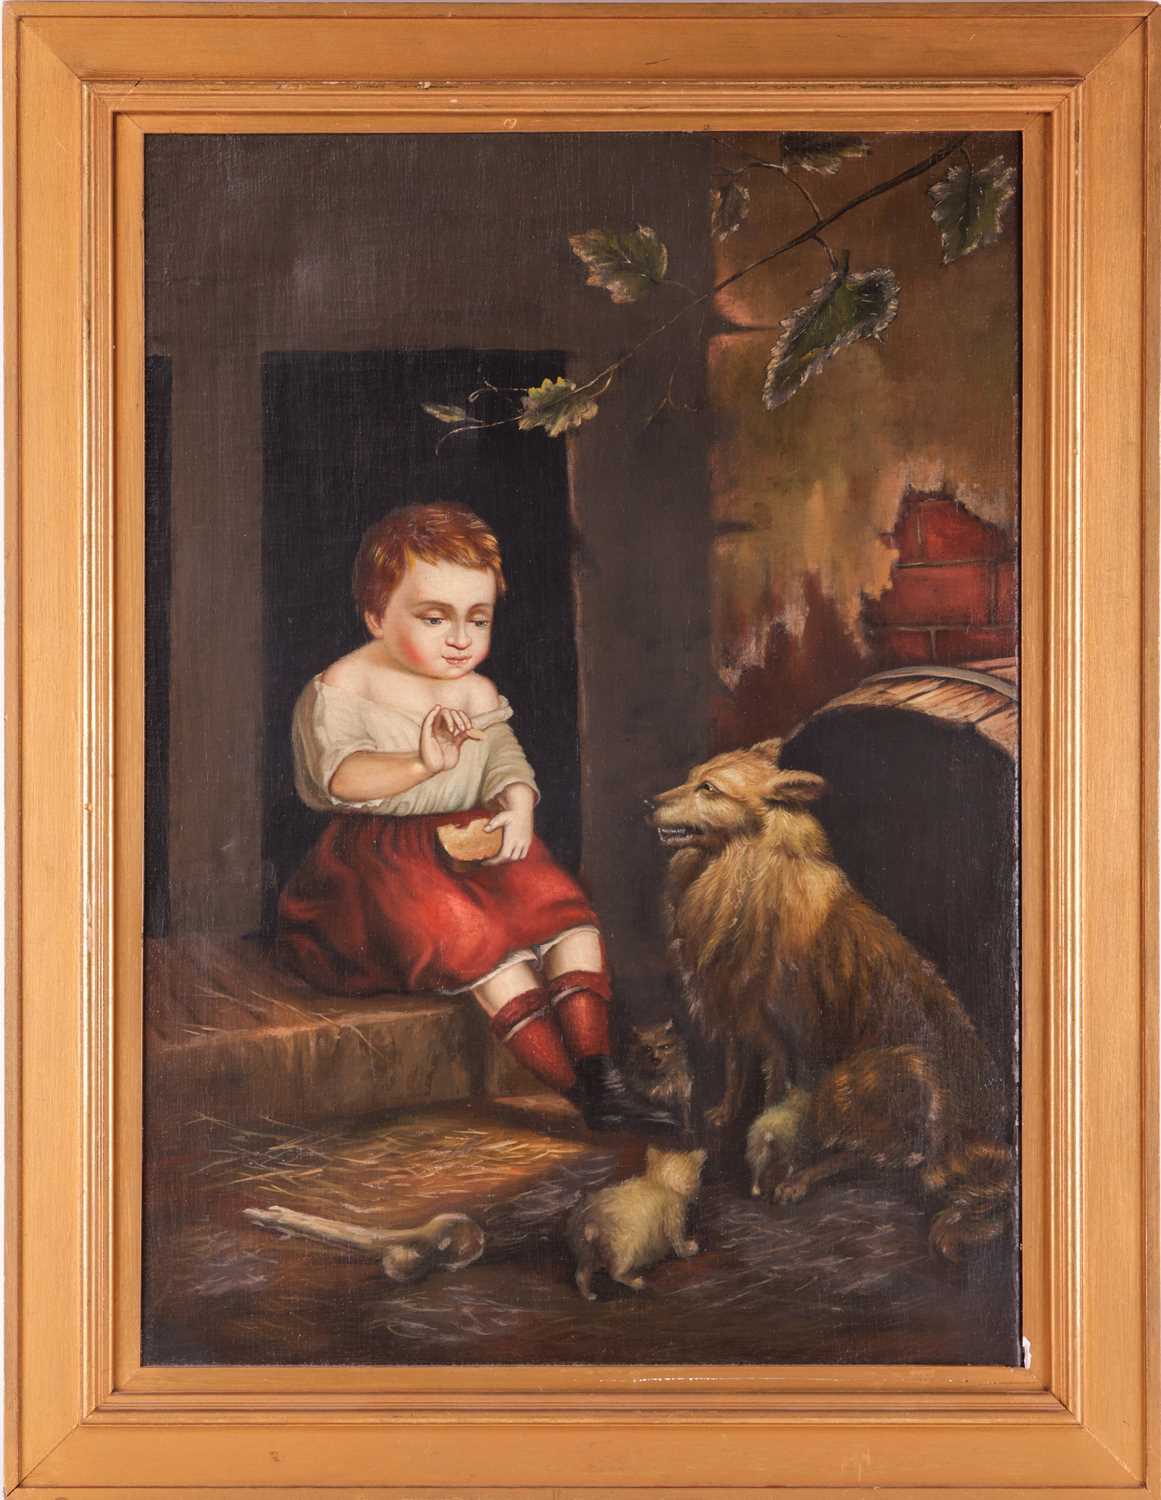 British School 19th Century, 'A young boy and his dog', unsigned, oil on canvas, image 49 cm x 69 cm - Image 2 of 9